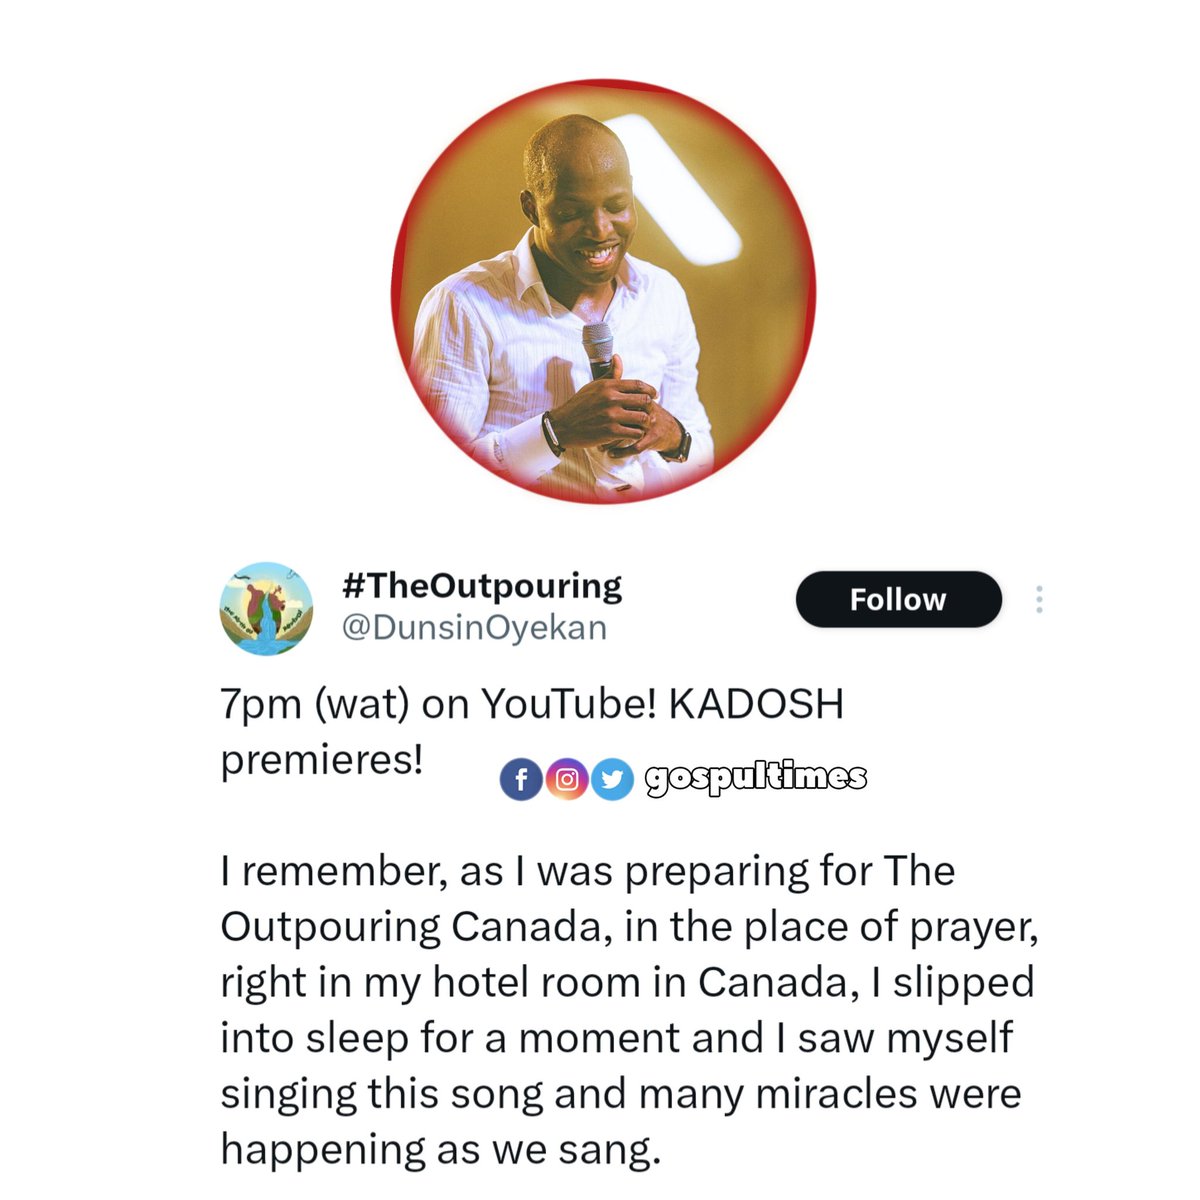 Min. Dunsin Oyekan shared how he got his newly released song 'KADOSH'

Follow @gospultimes 
.
.
#gospelupdates #gospel #gospelartist #gospelsongs #gospultimes